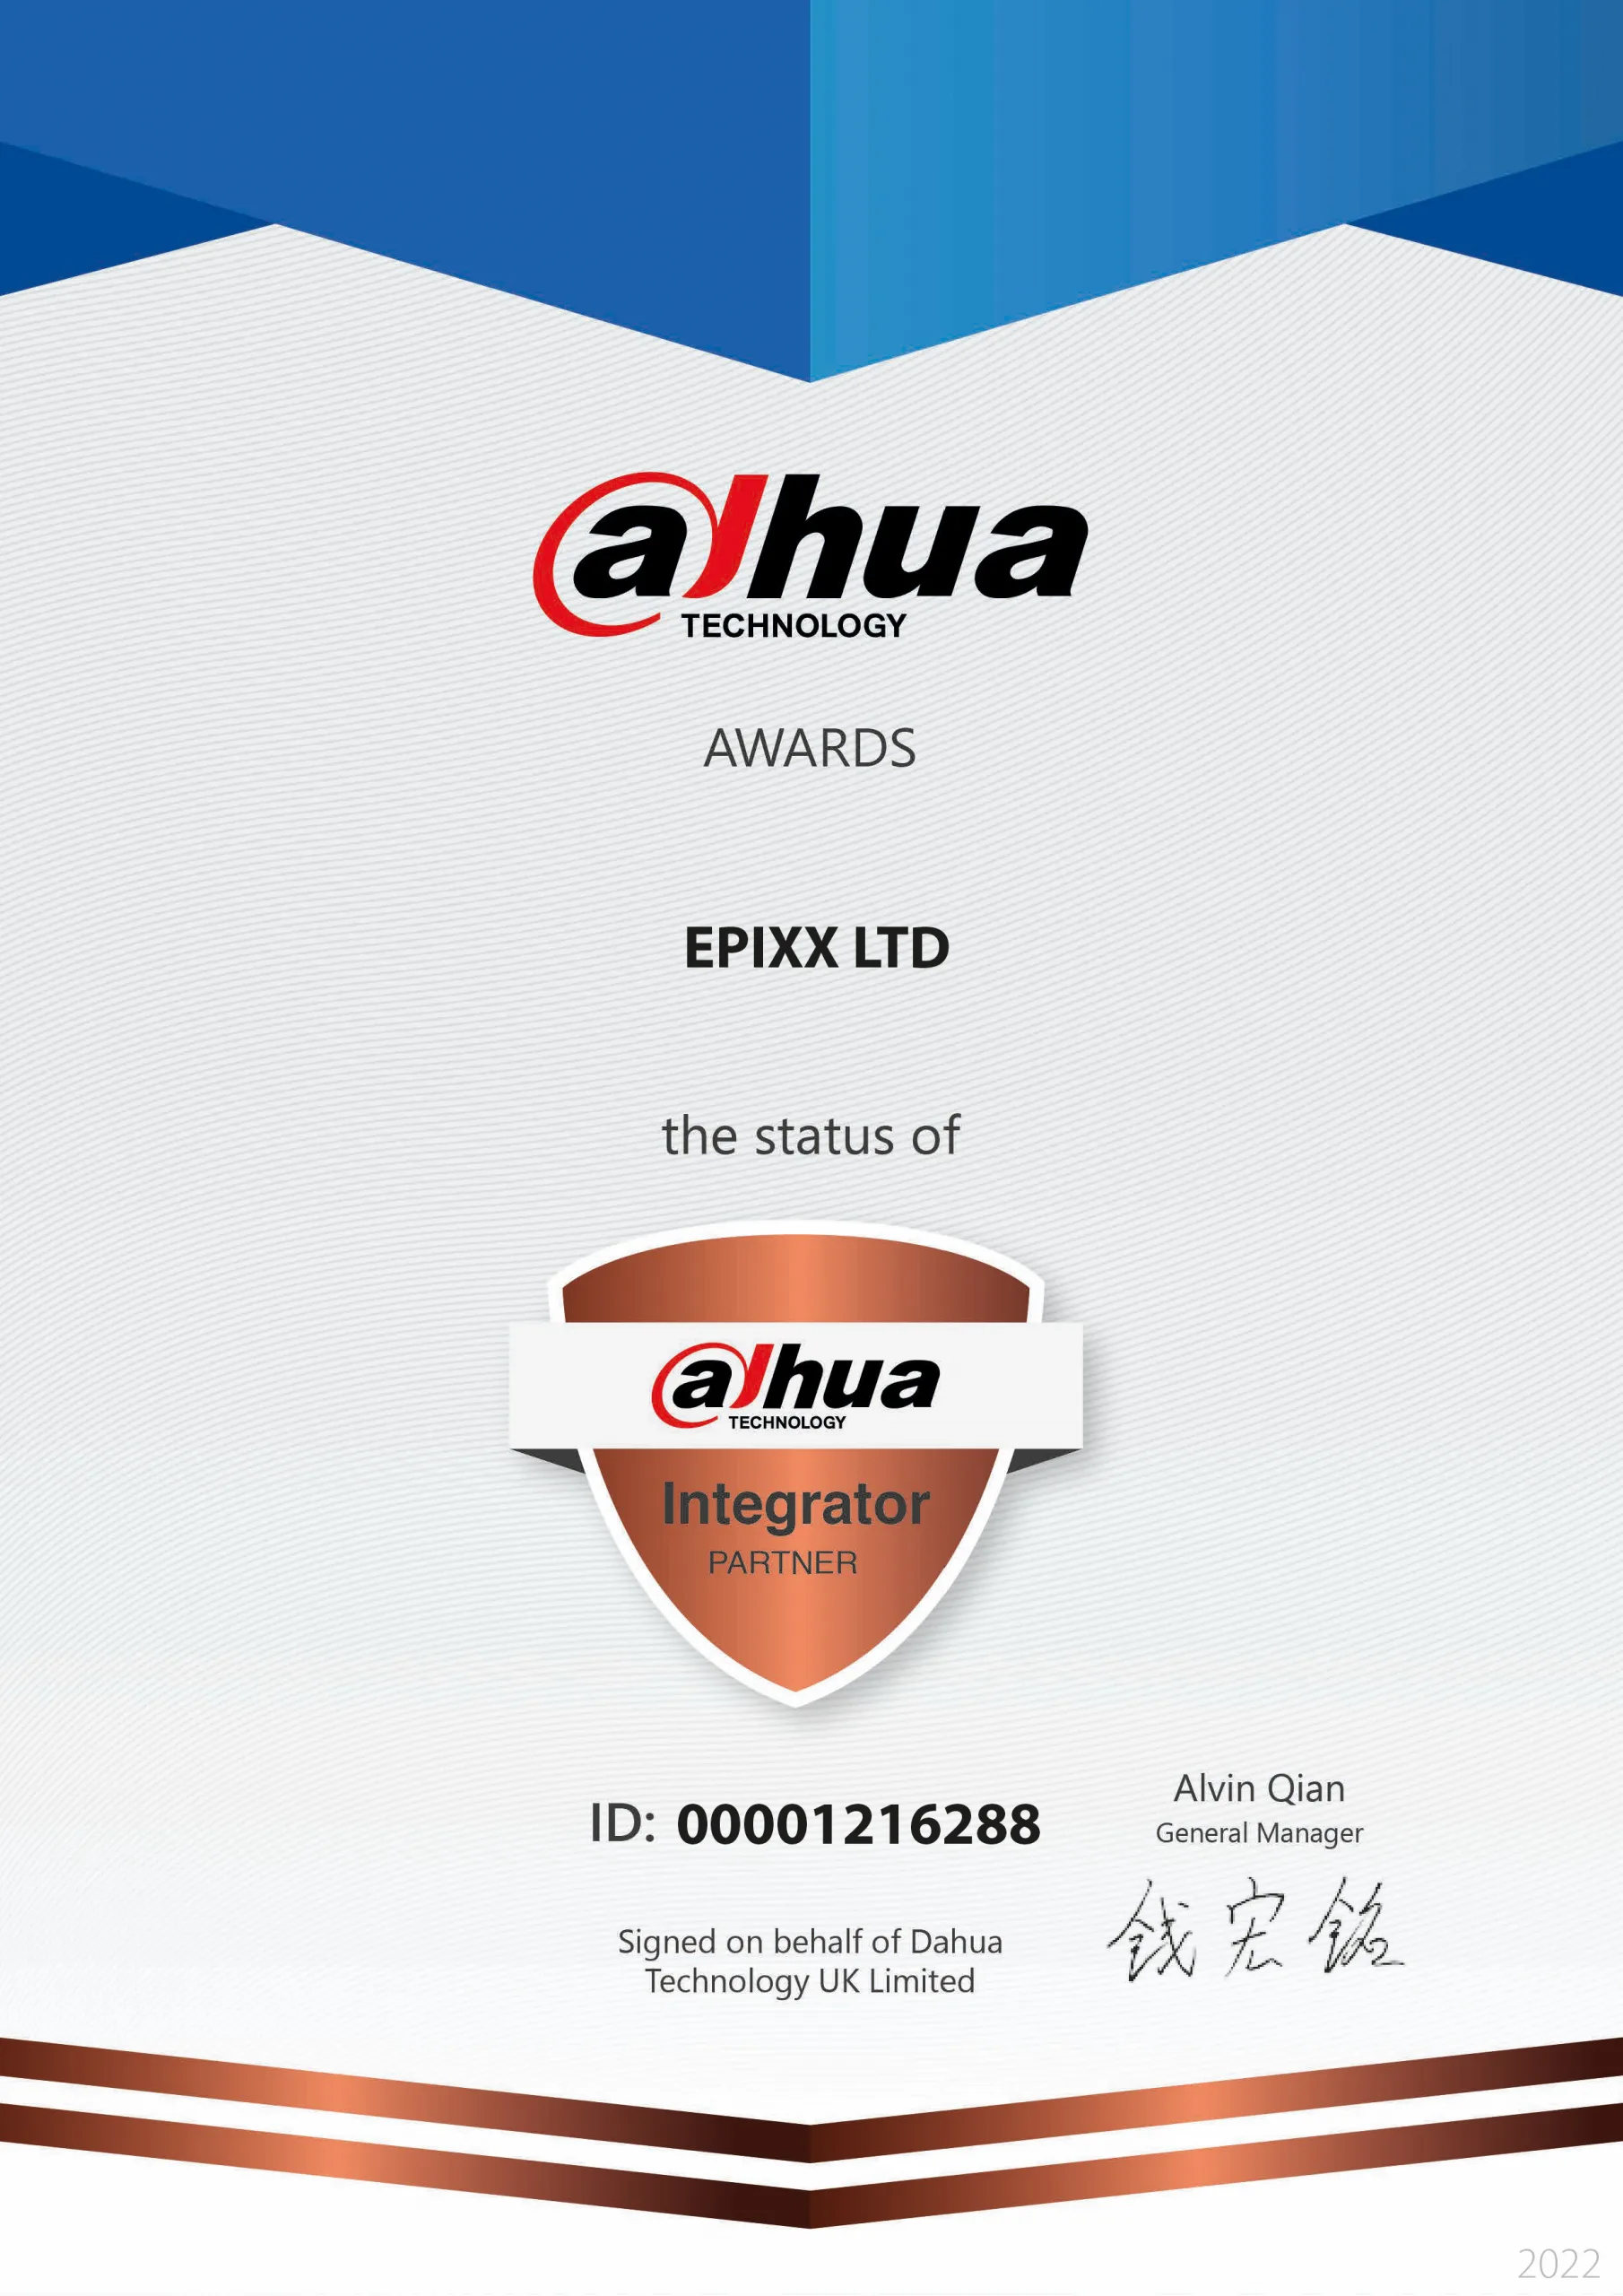 Dahua approved certificate. Awarded to Epixx Systems